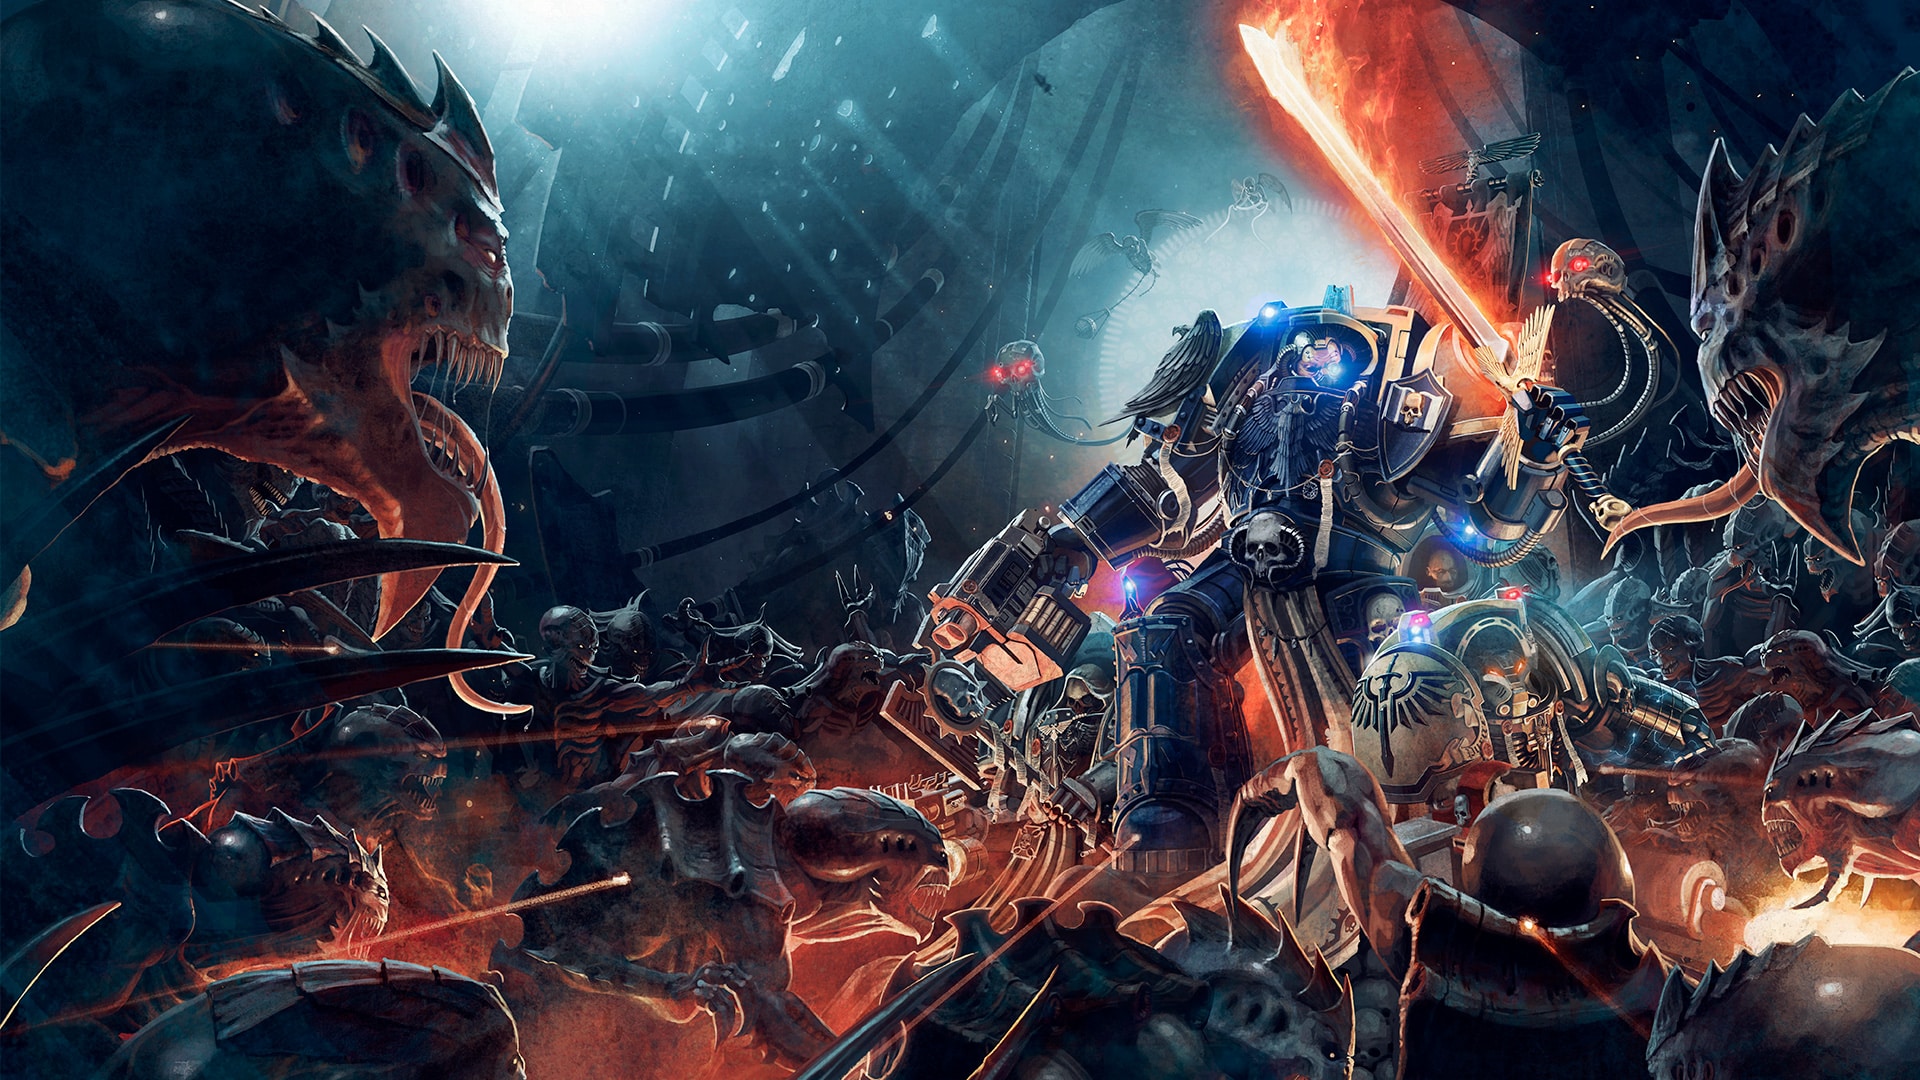 download deathwing enhanced edition